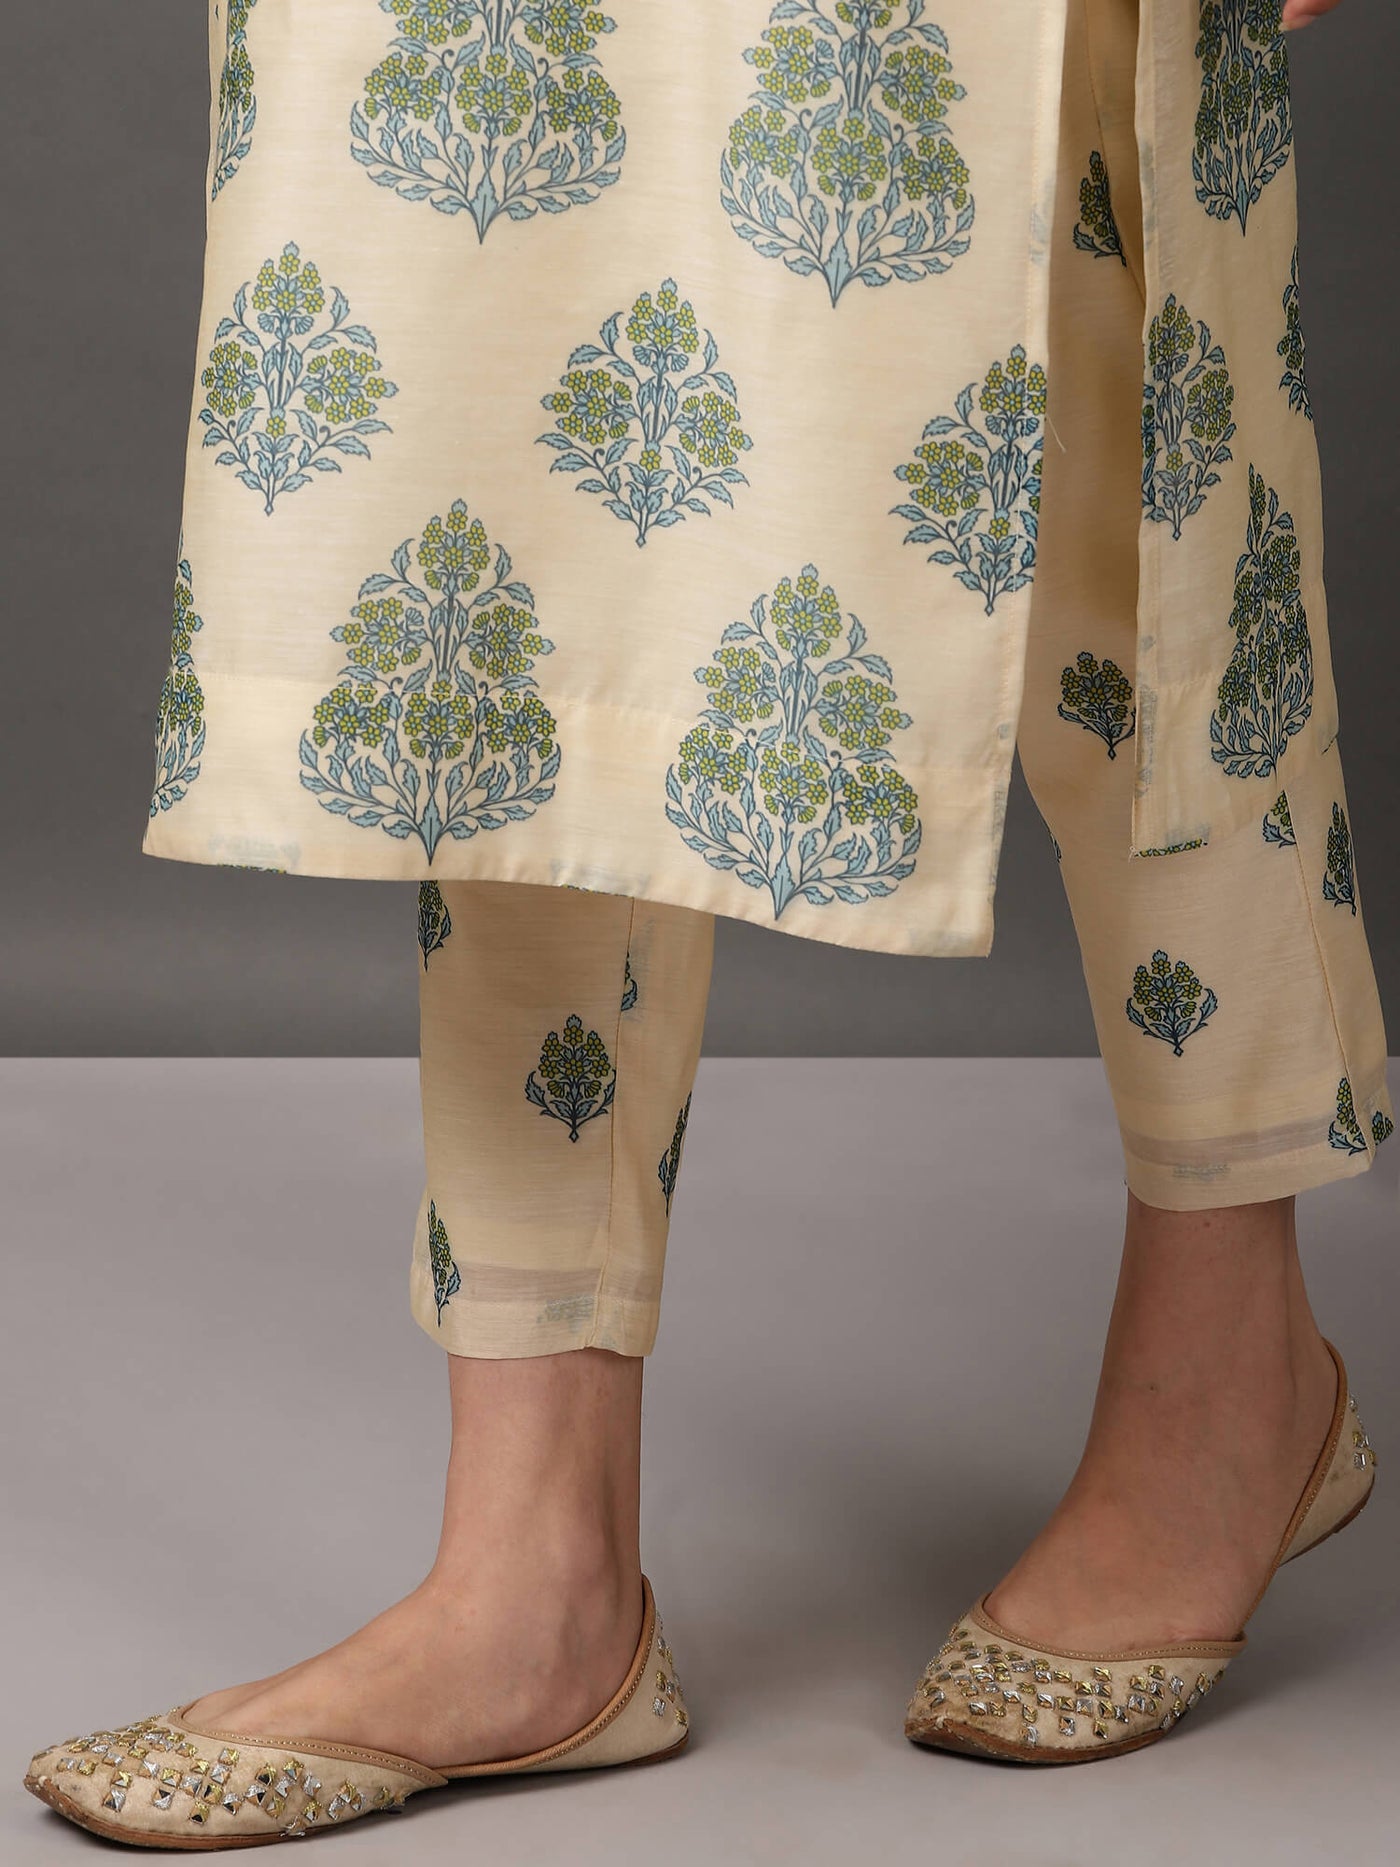 Off White Printed Chanderi Kurta And Pant With Dupatta & Camisole